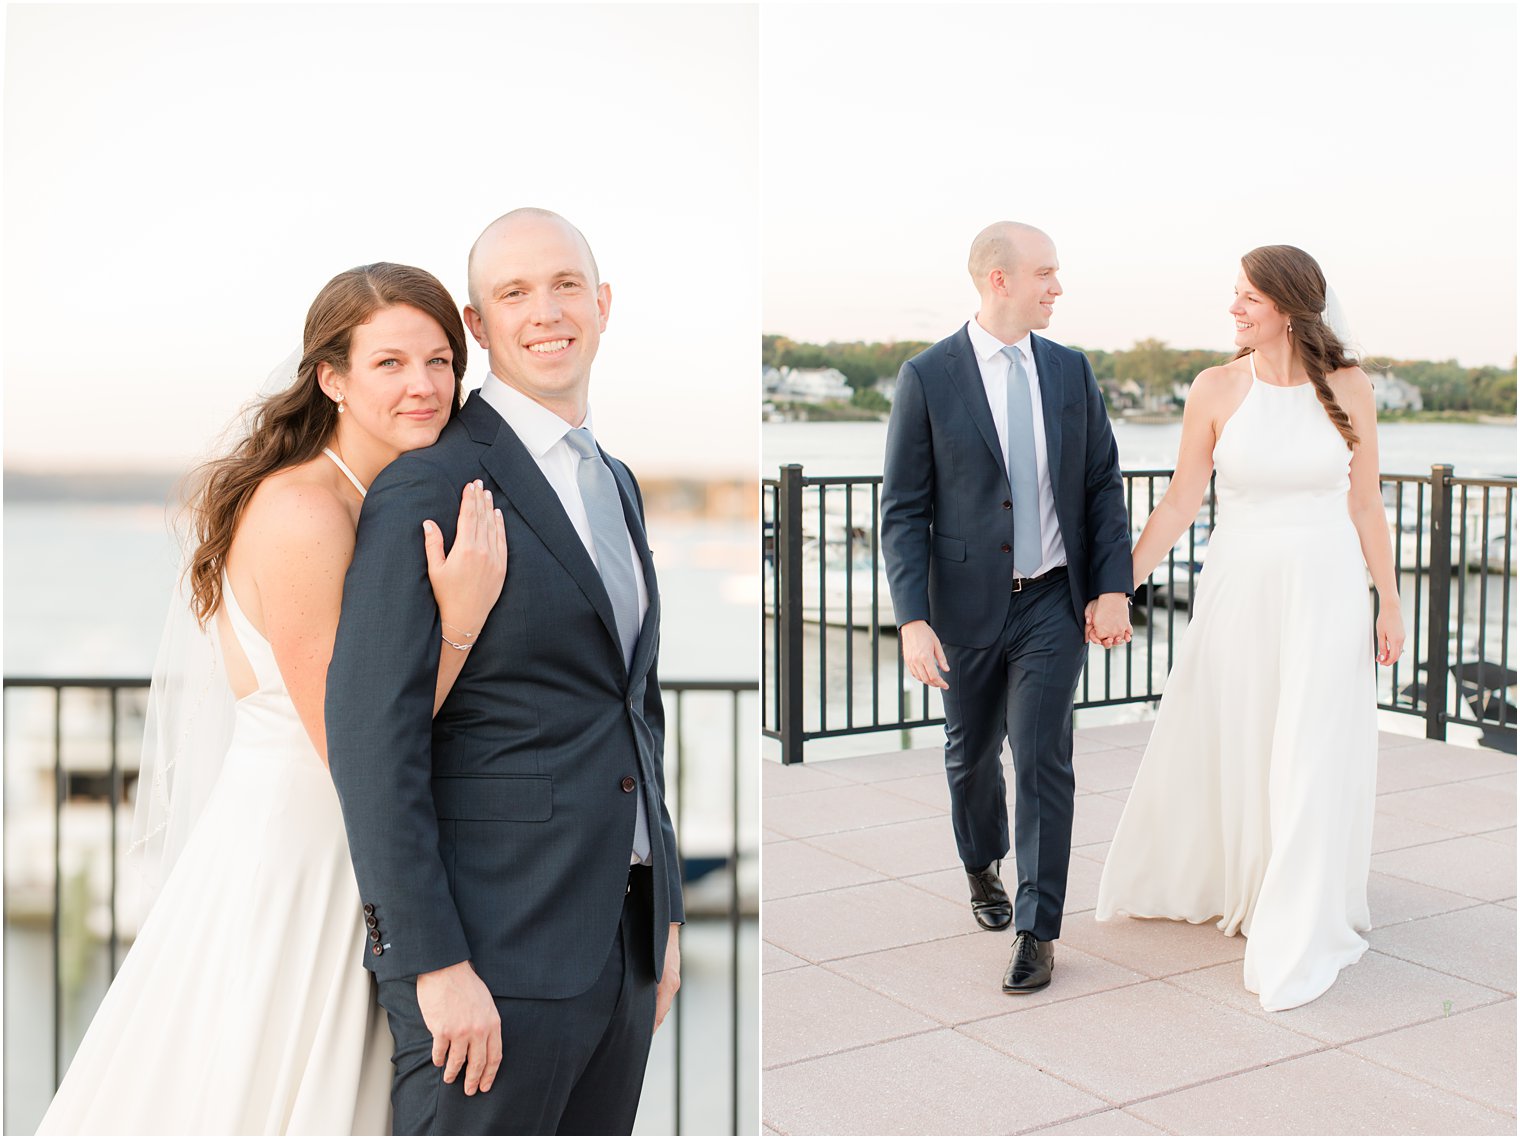 newlyweds walk along waterfront in Red Bank NJ at Molly Pitcher Inn